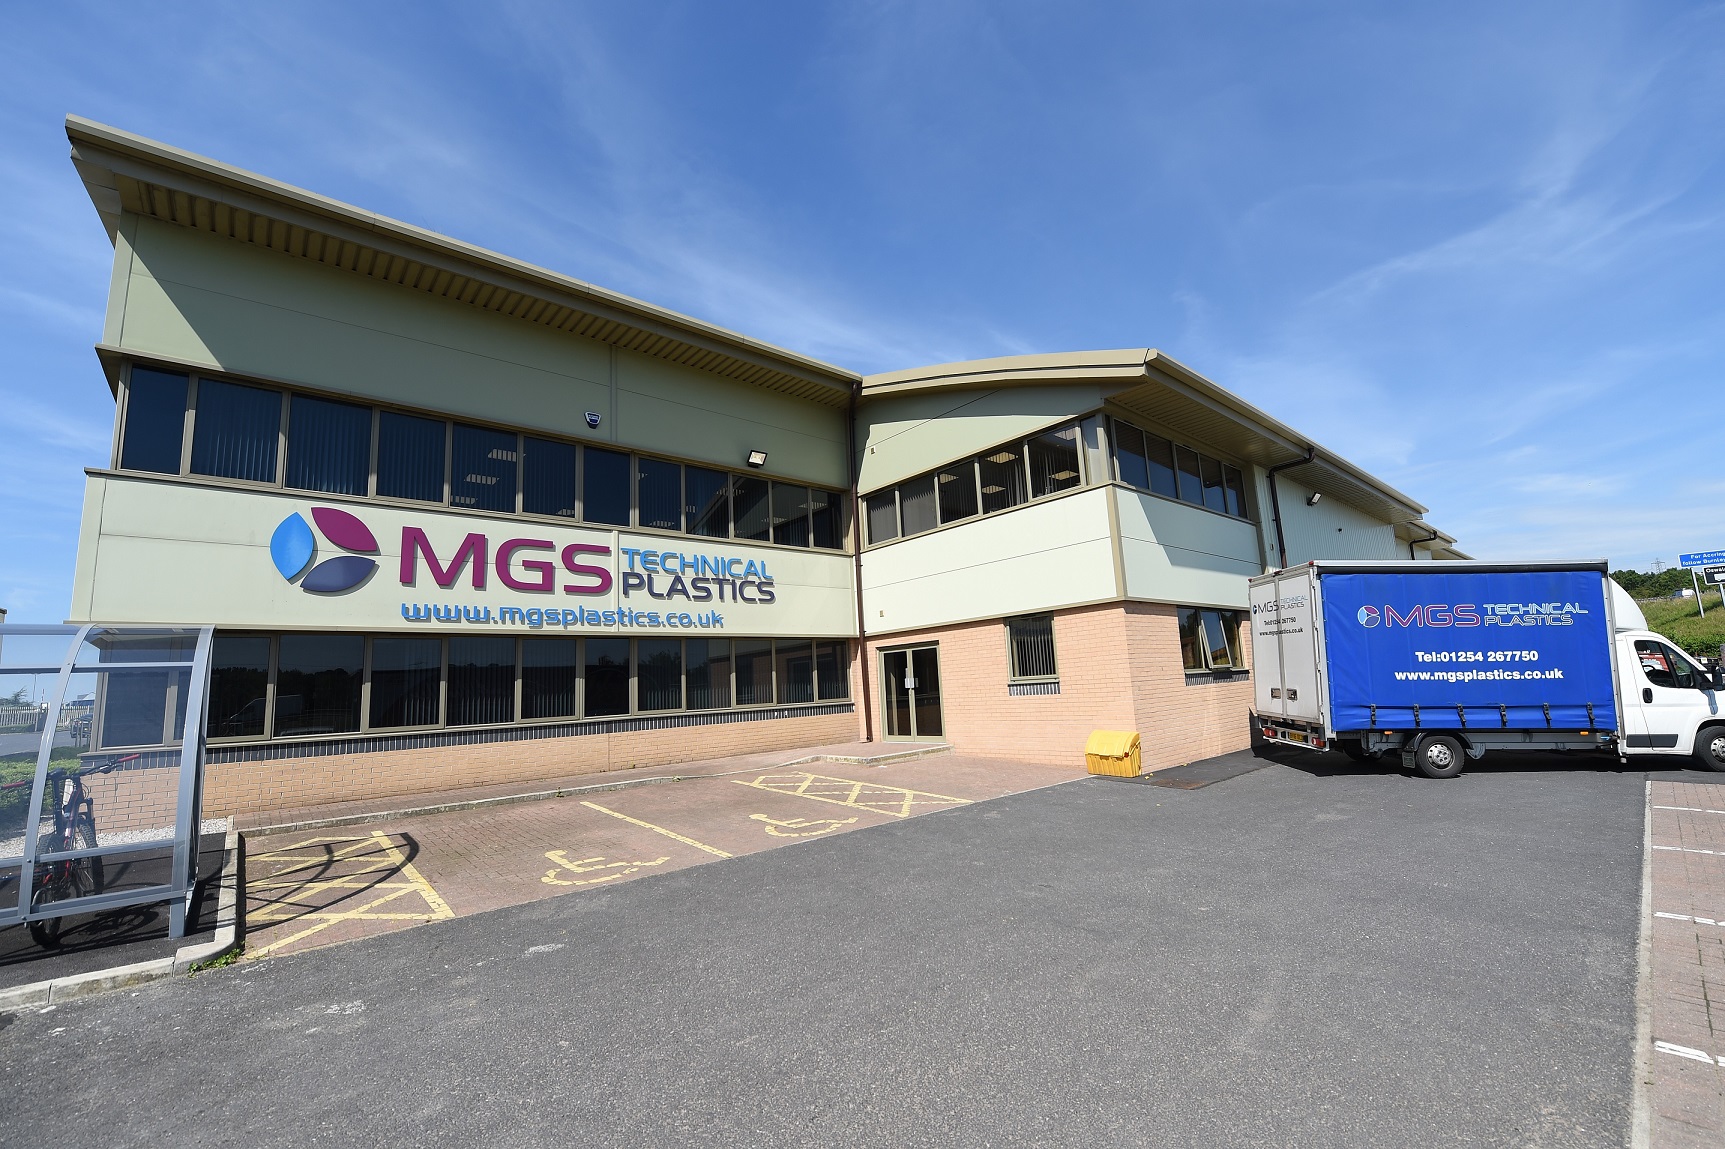 The MGS Technical Plastics Building